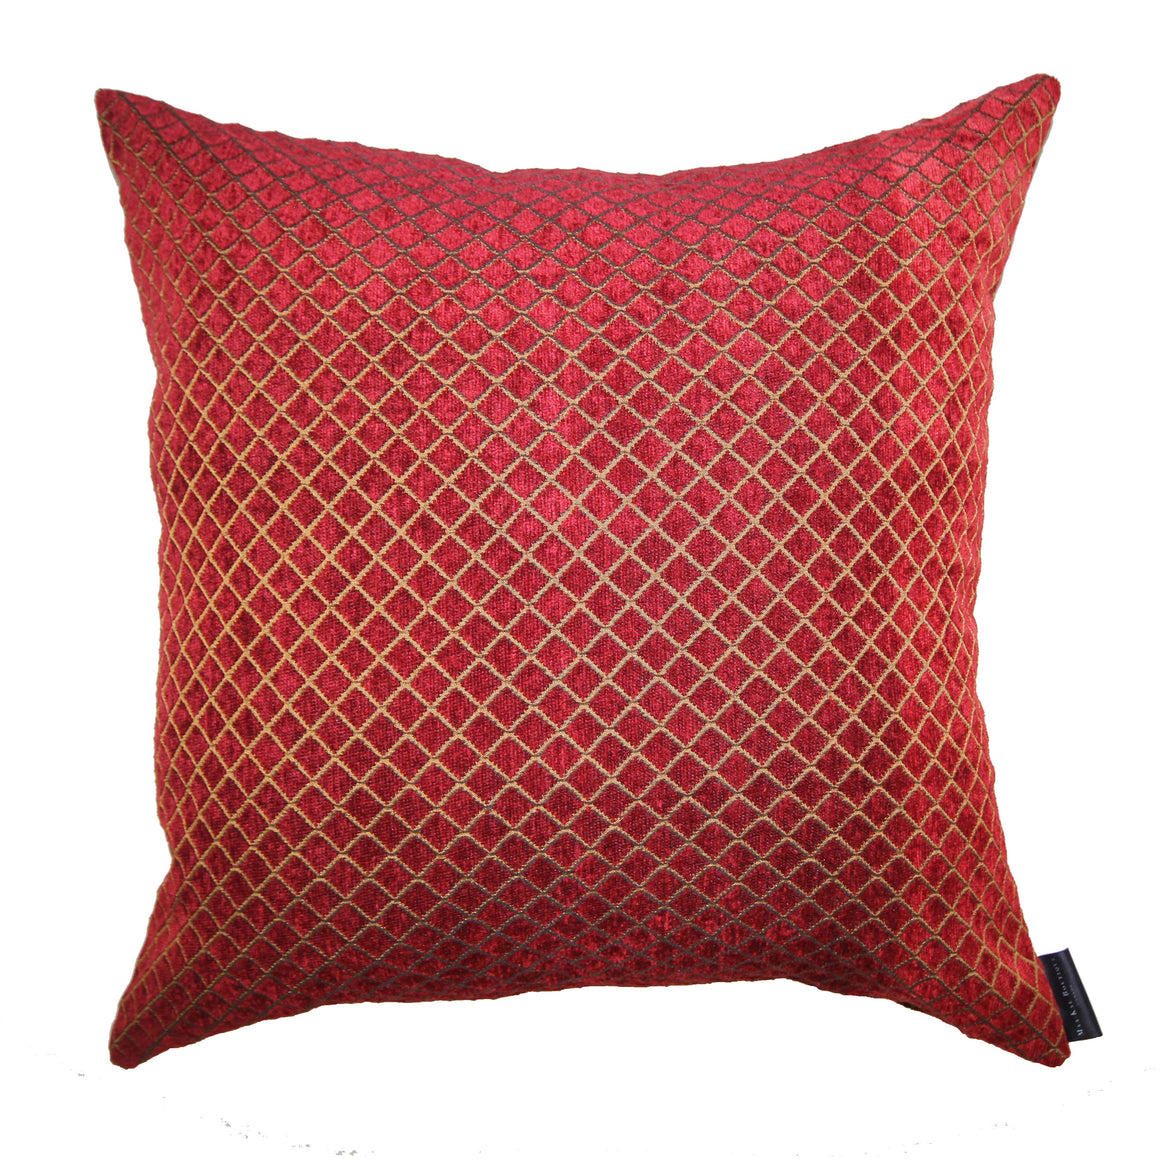 Rose - Wine Red and Gold Velvet Plaid Pillow Cover - 20x20